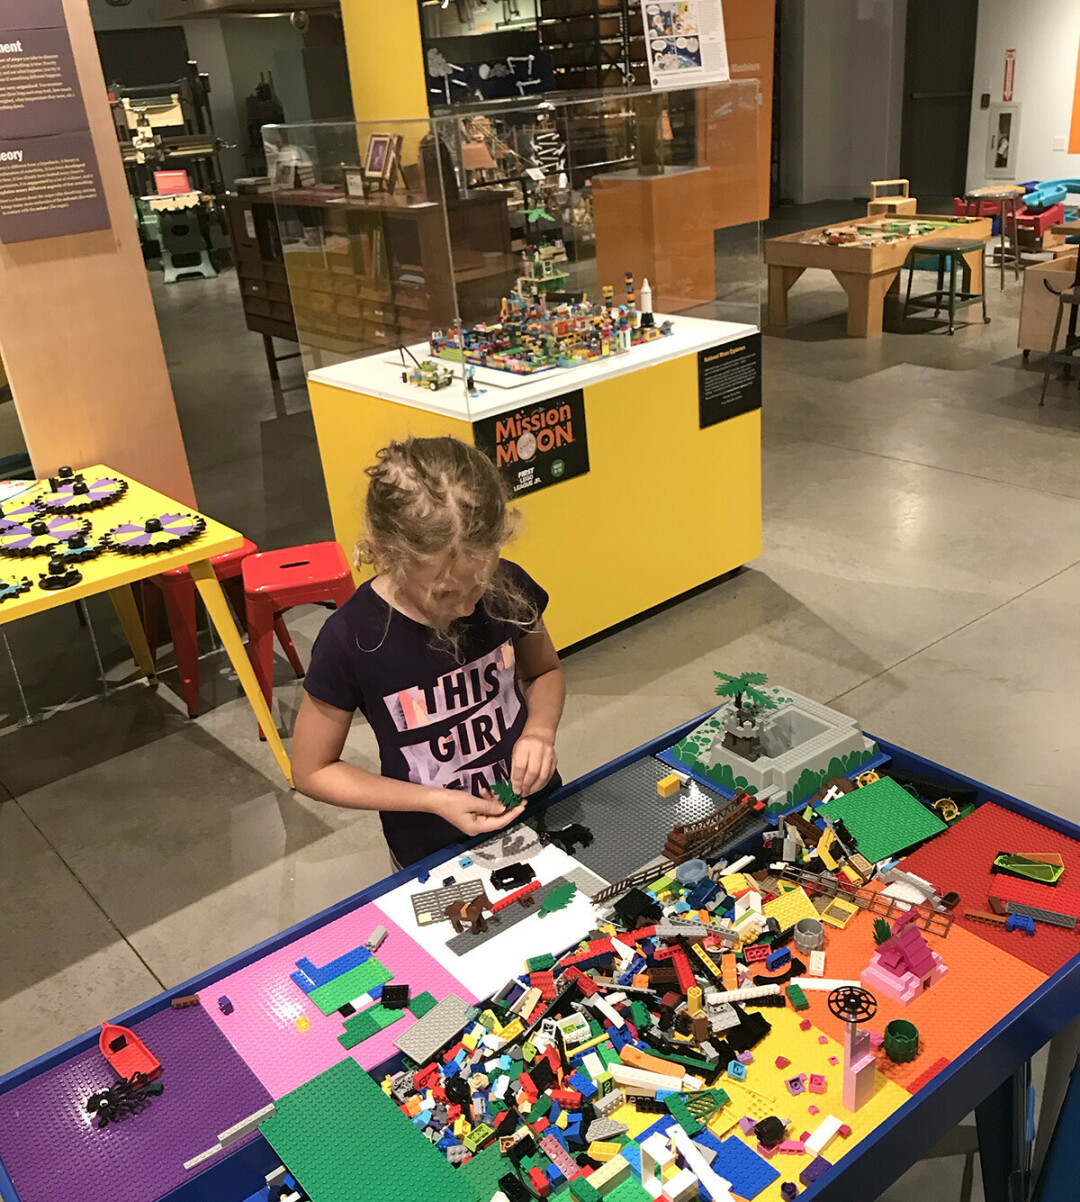 Fun with LEGOs at Fulton's Workshop inside the Rassbach Museum.